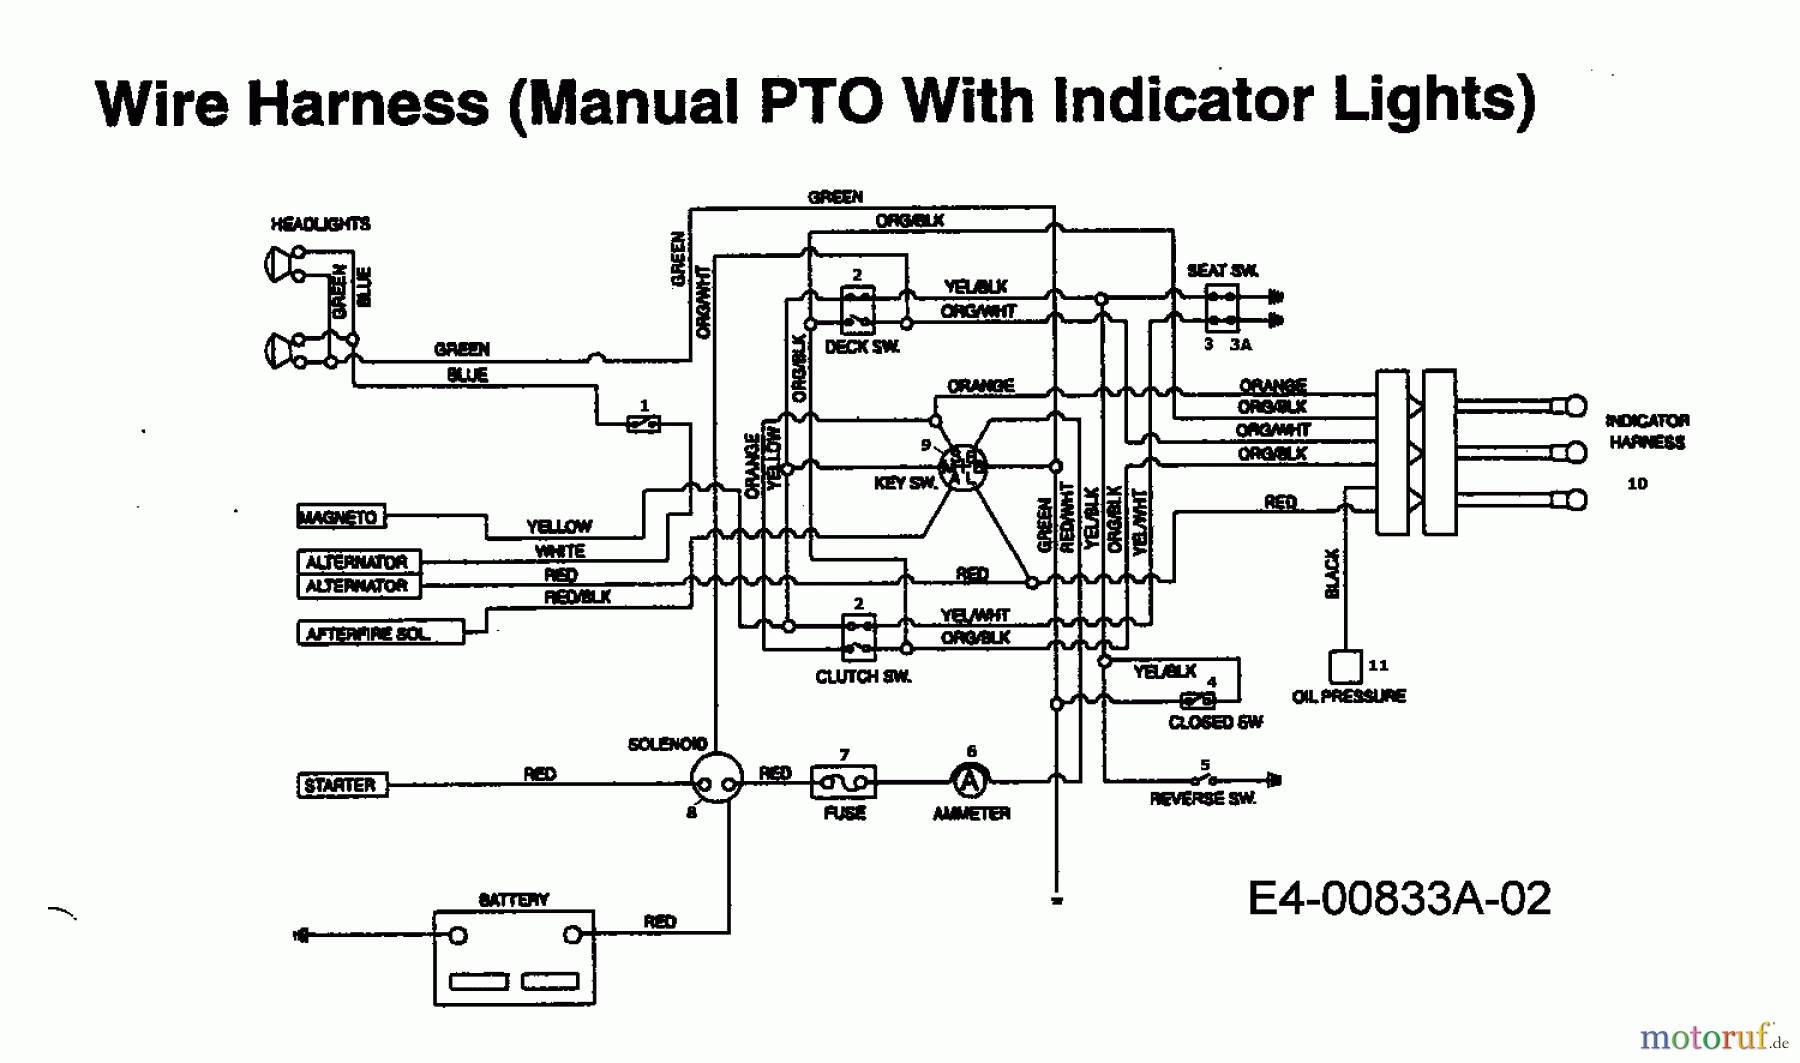  Edt Lawn tractors EDT 145 H-102 13CP793N610  (1999) Wiring diagram with indicator lights